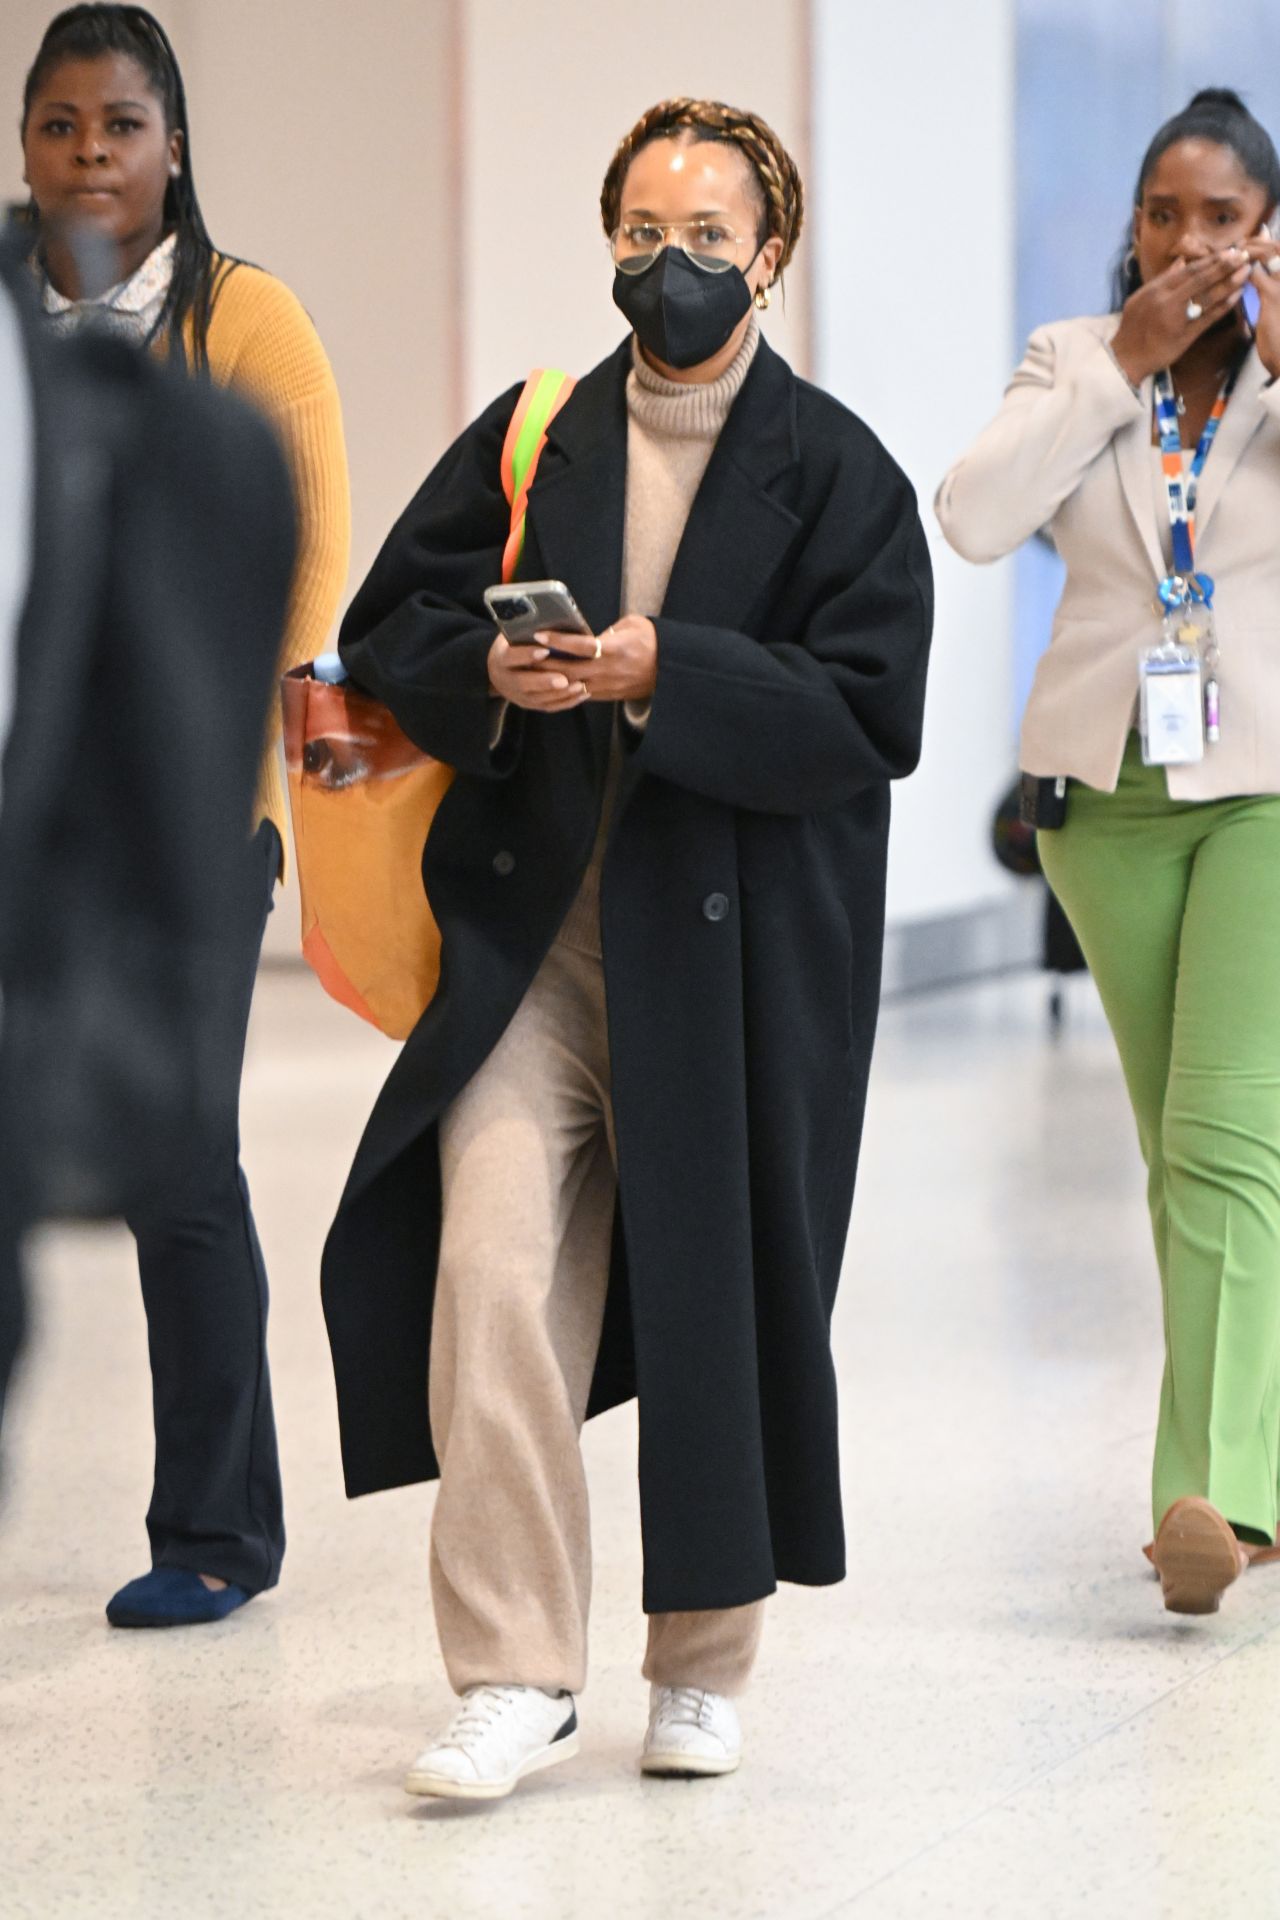 Kerry Washington in Travel Outfit - JFK Airport in NYC 10/25/2022 ...